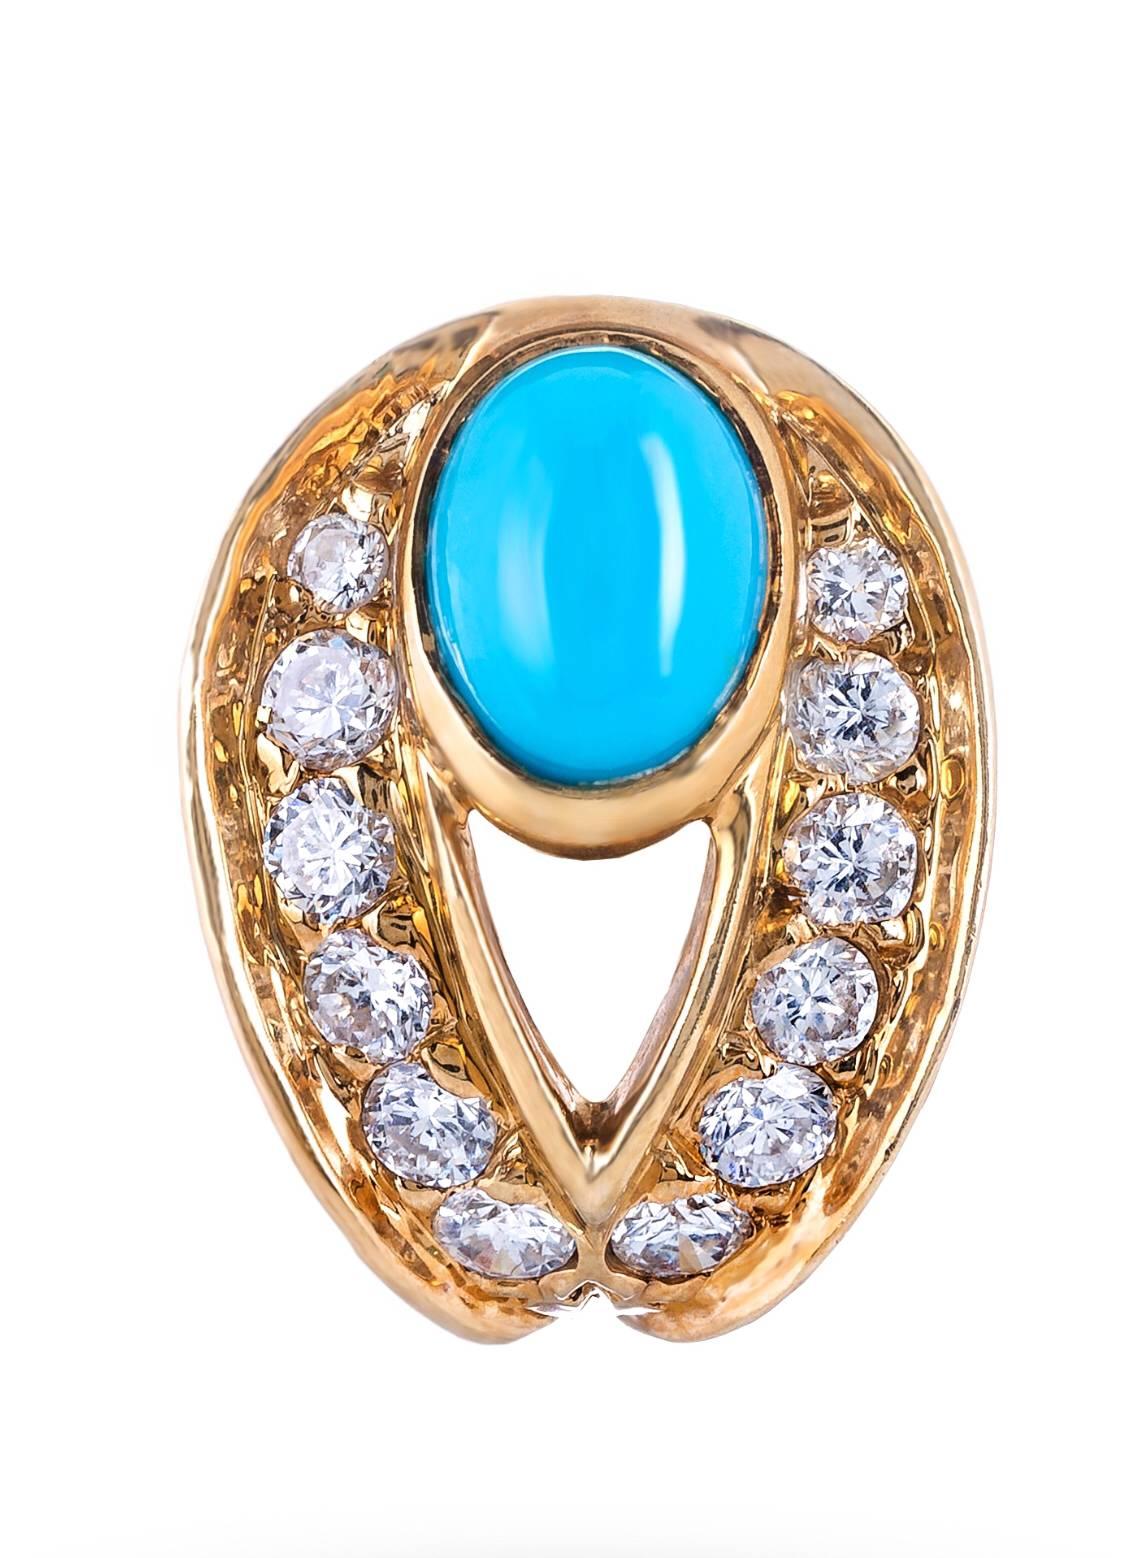 Boucheron mid Twentieth Century 18k Gold Earrings Centered with Cabochon Oval Turquoise Gold Set With 1,6 Carats Diamonds VS Clarity.